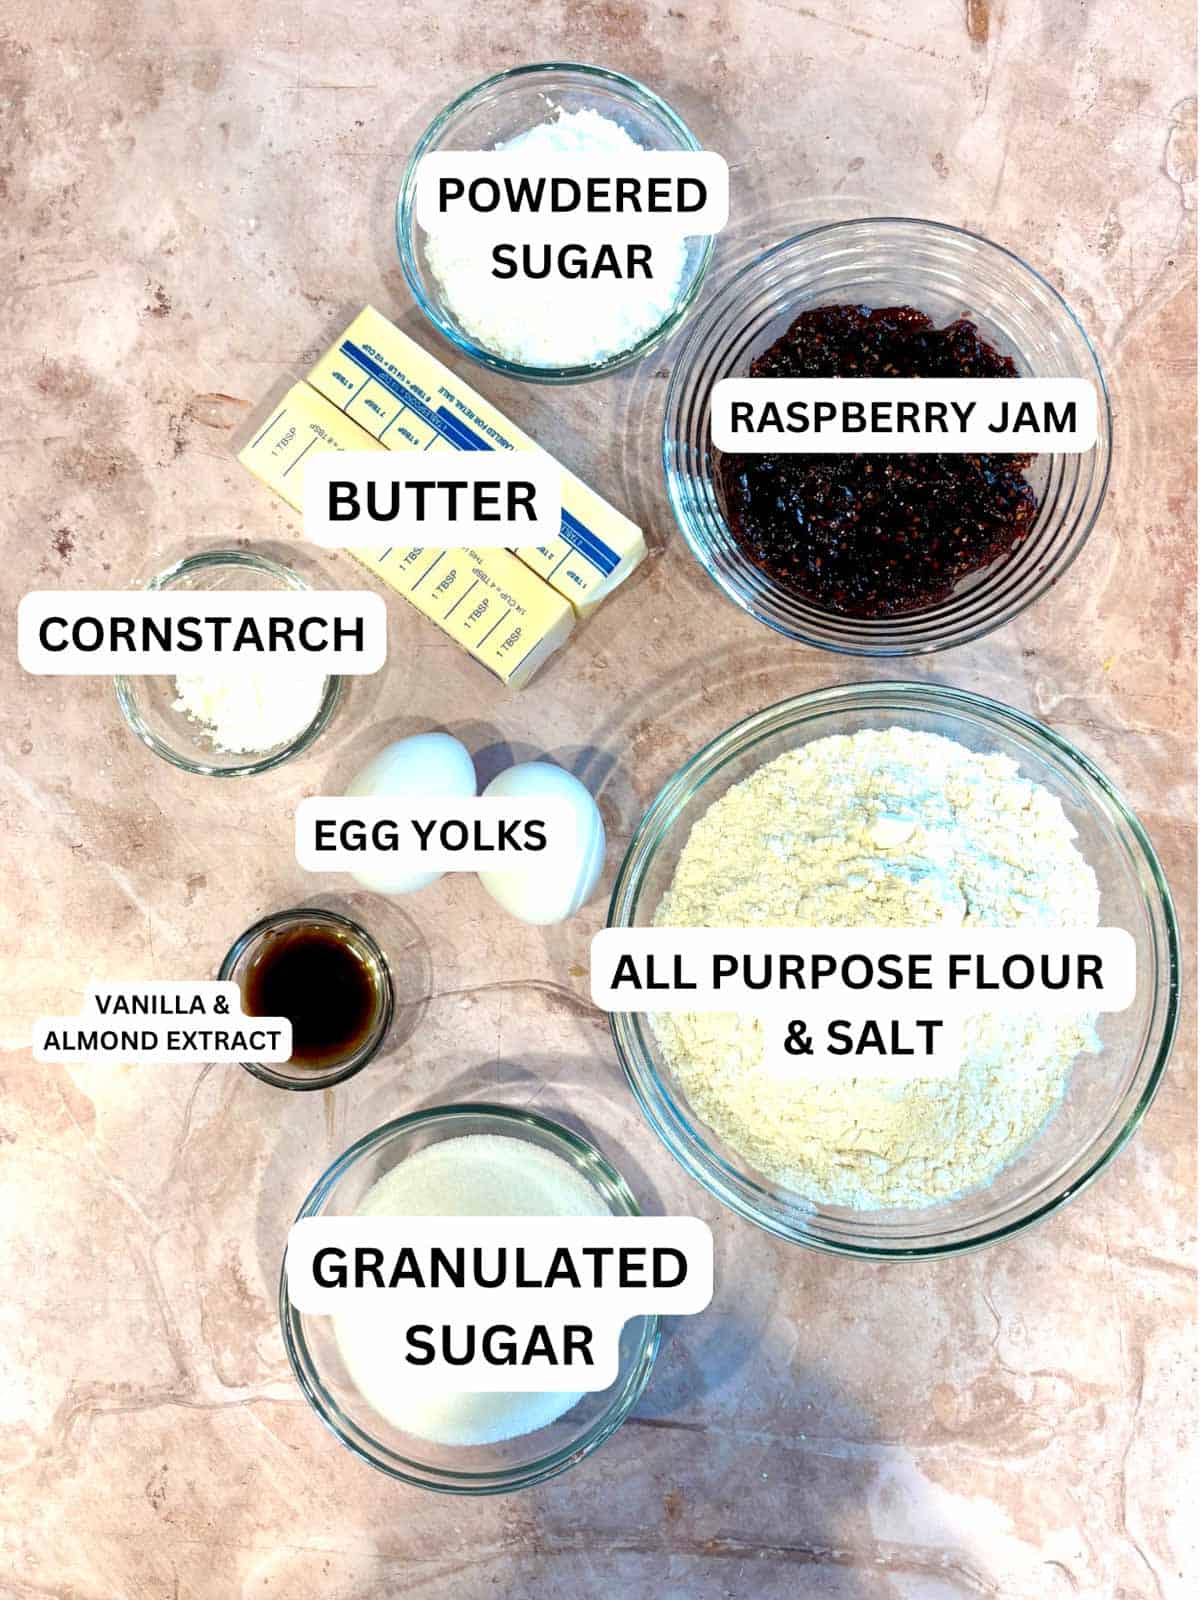 Ingredients out on the counter, sugar, butter, raspberry jam, almond extract, eggs, and powdered sugar.